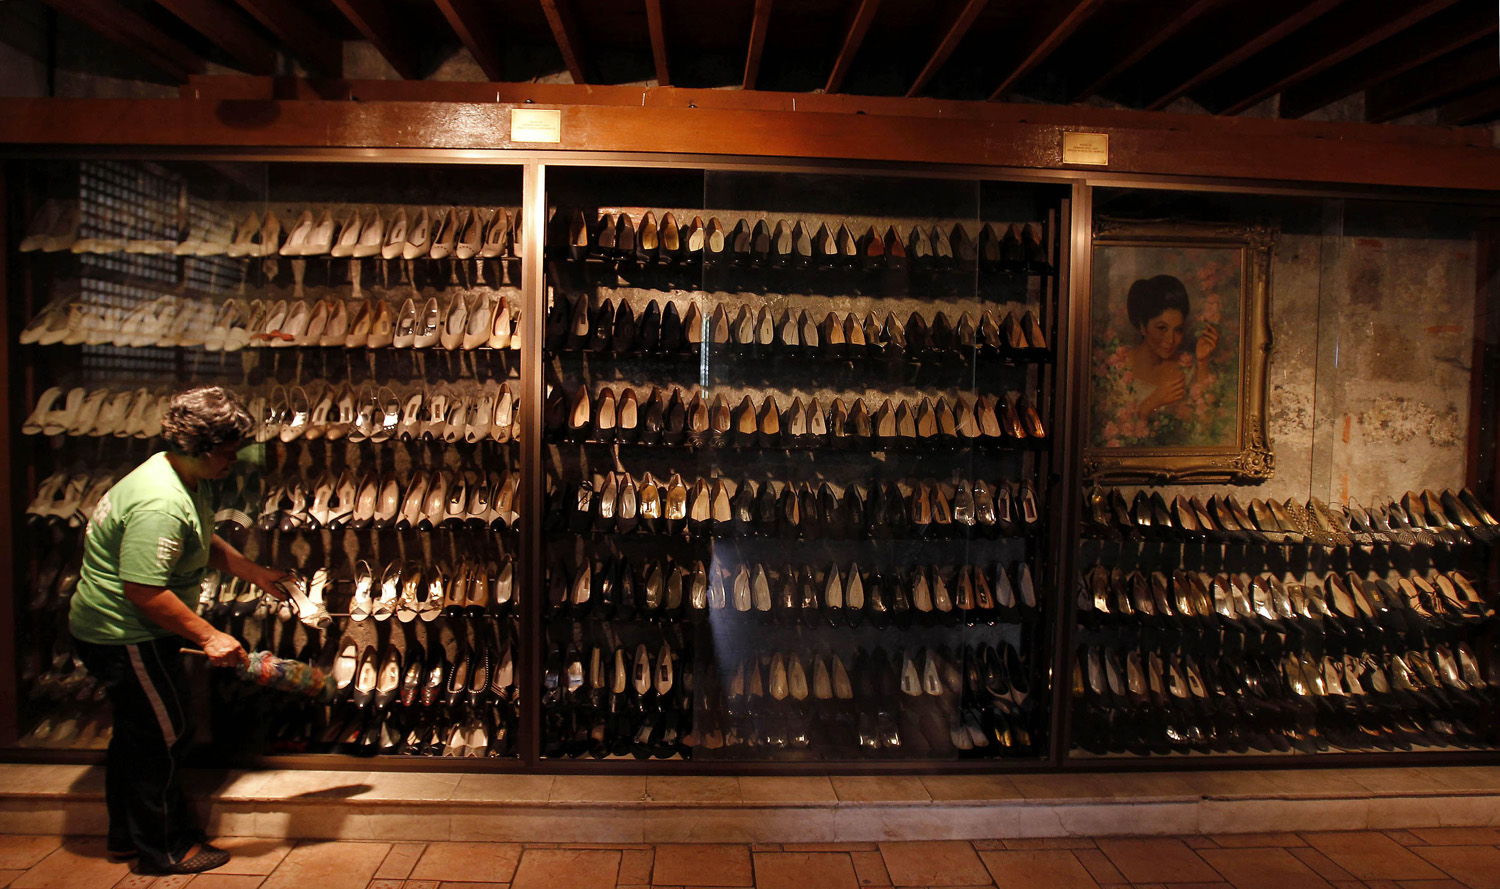 Philippines city restores Imelda Marcos shoe collection after flood damage